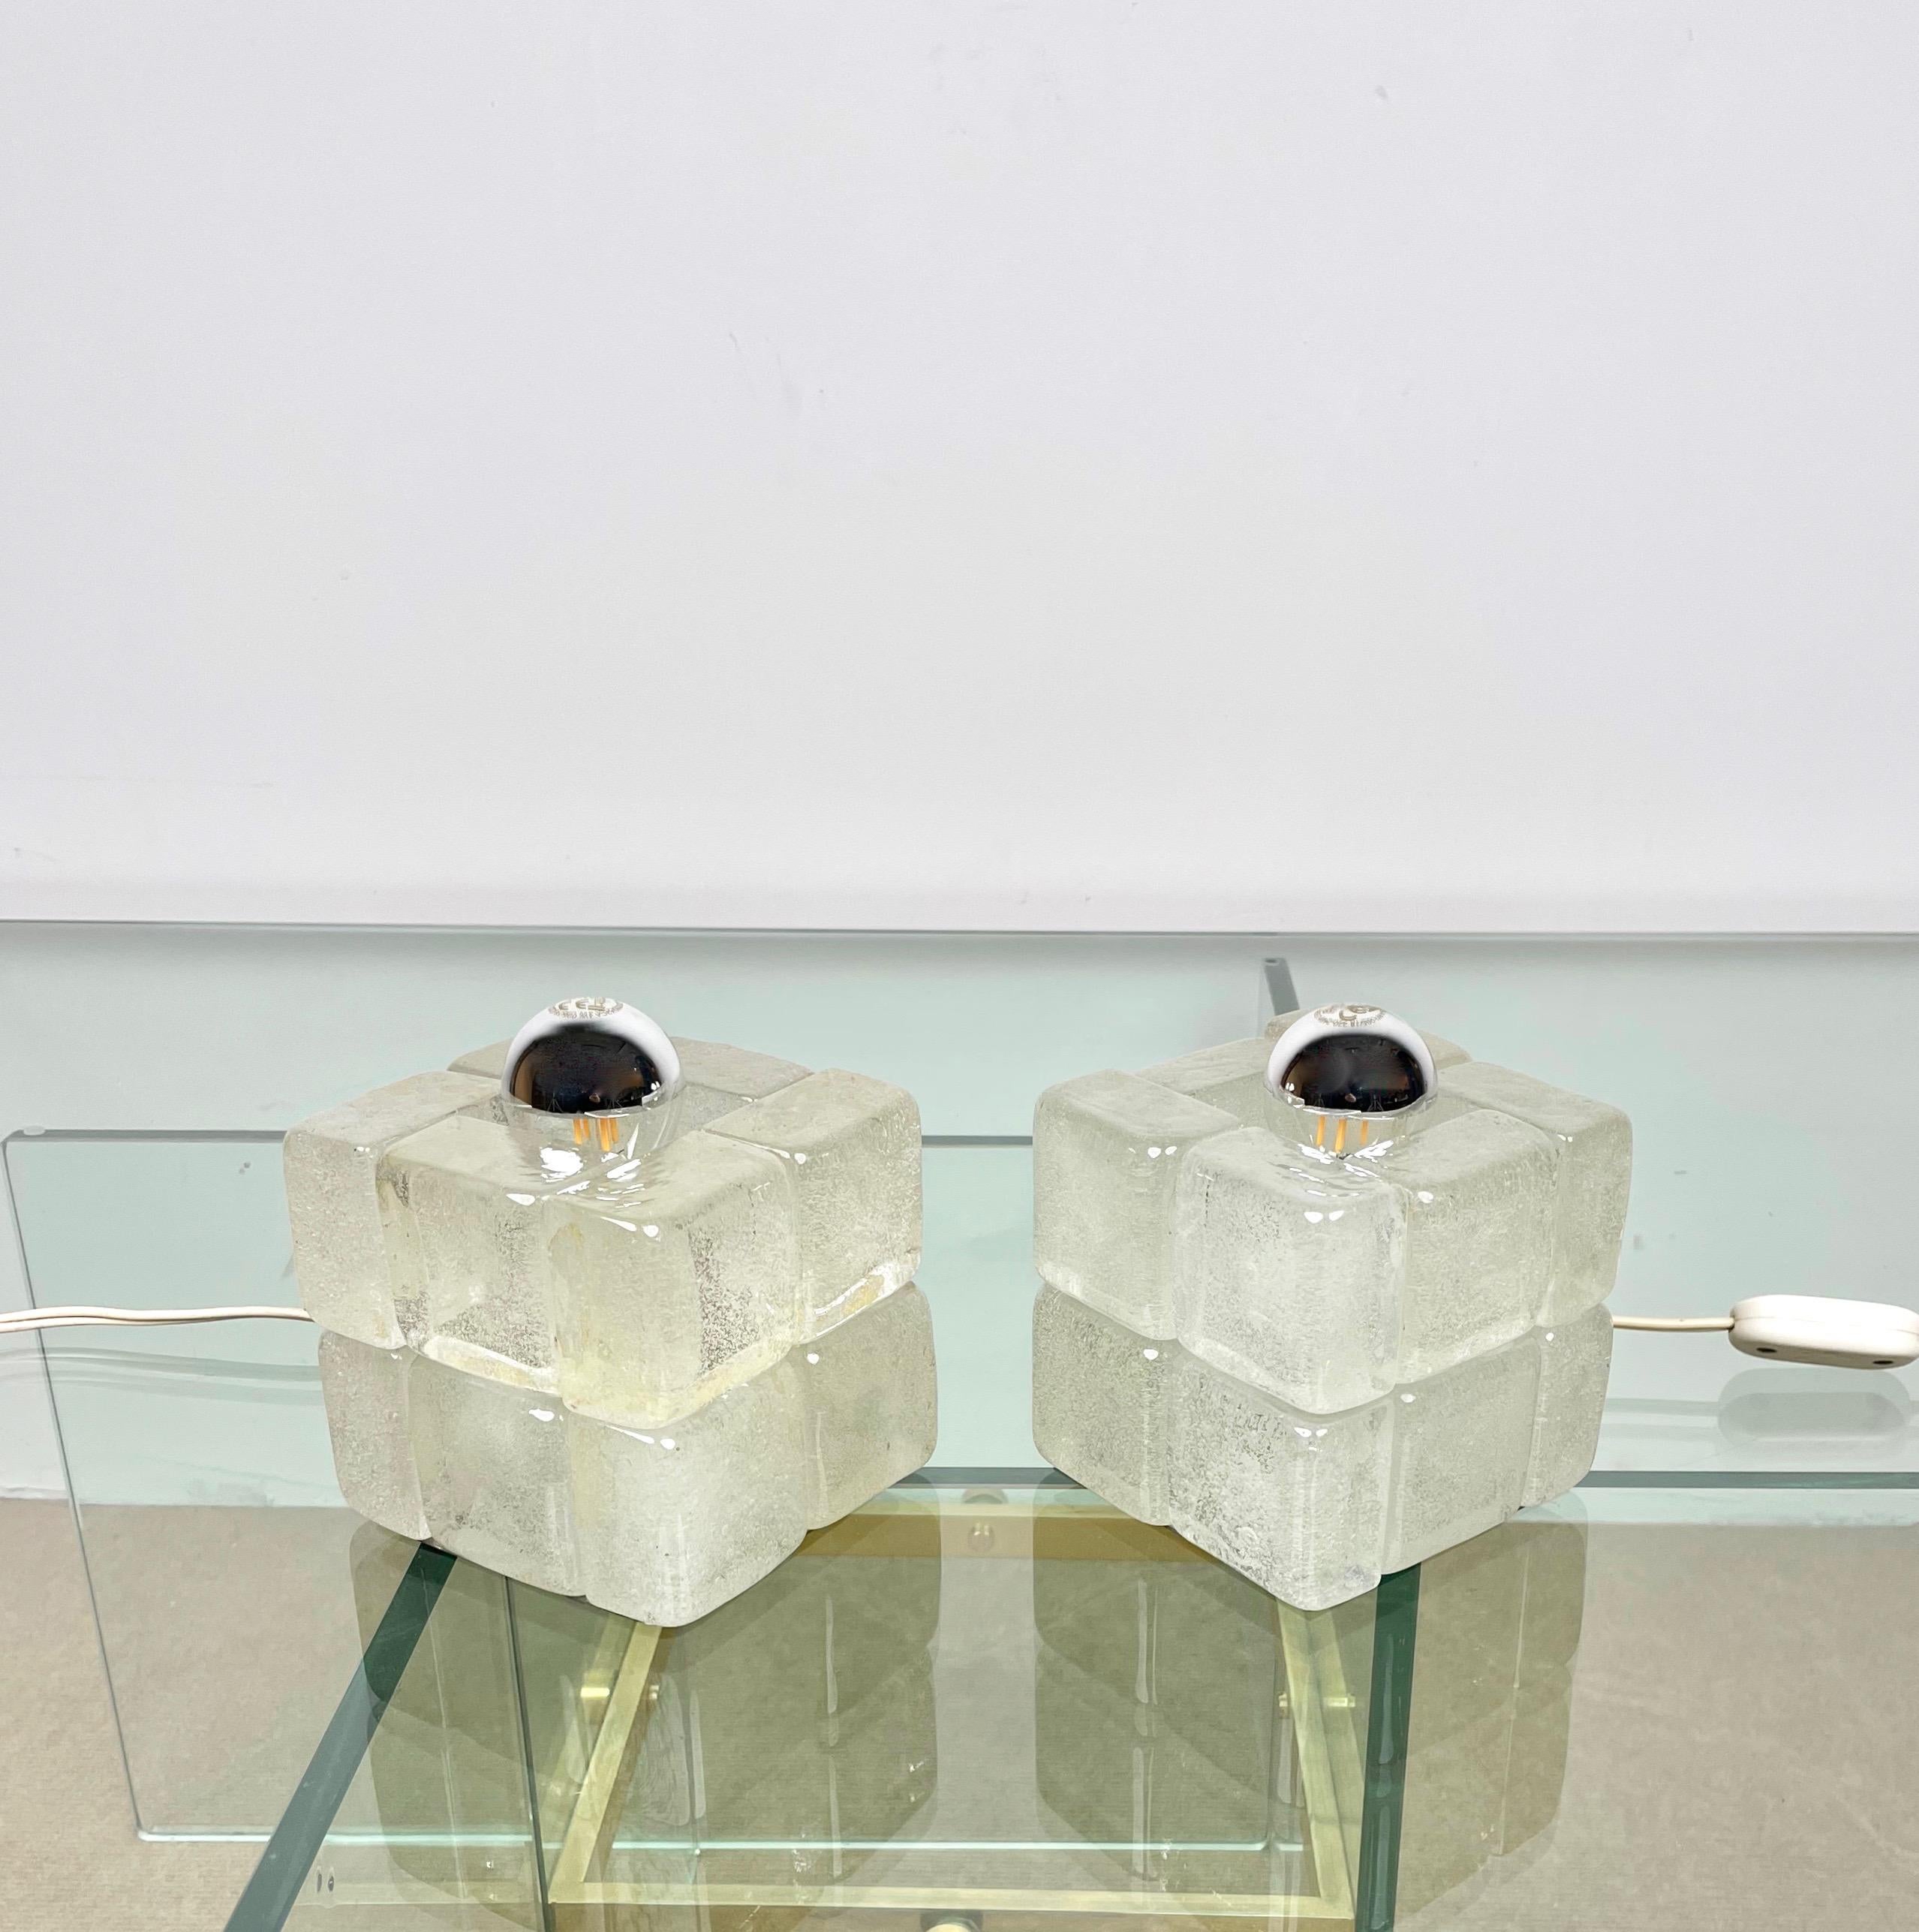 Pair of Murano glass cube table lamps by the Italian designer Albano Poli for Poliarte. 

Made in Italy in the 1970s.